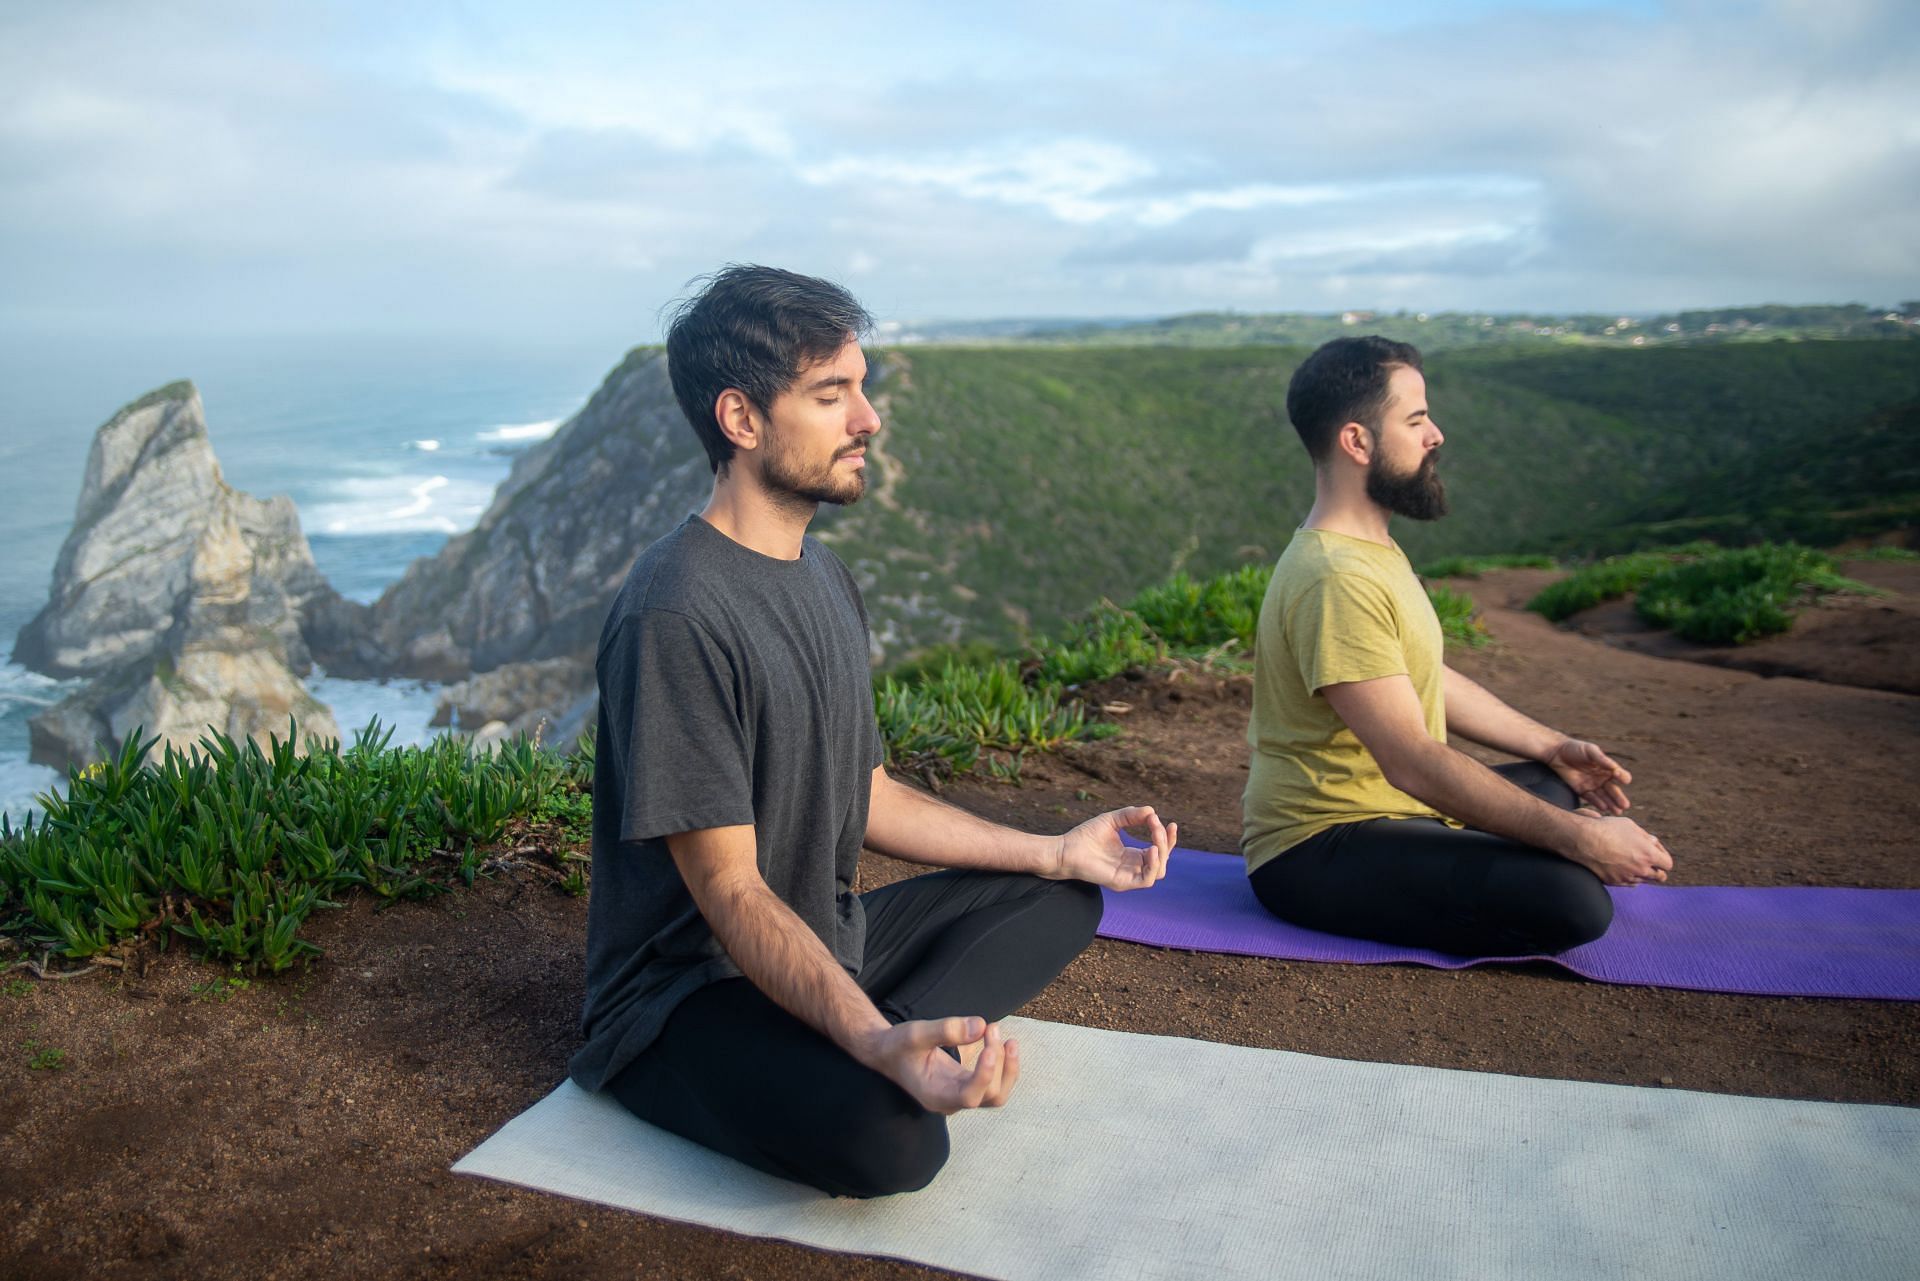 Meditation and yoga helps prevent hair loss from stress. (Image via Pexels/Kampus Production)